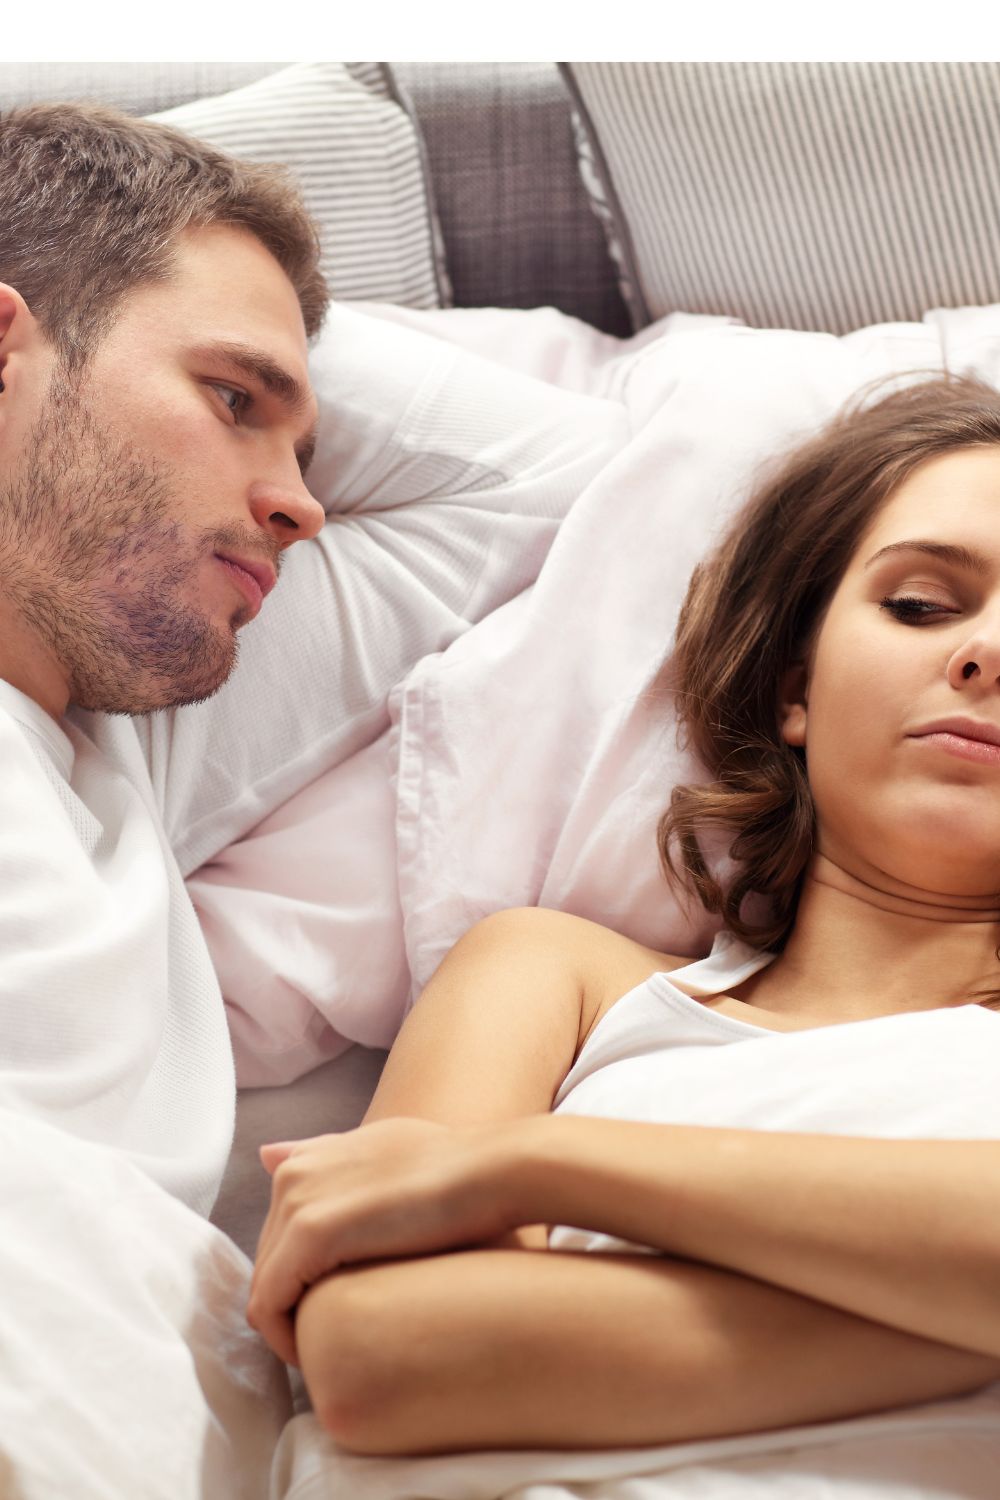 Reasons Married Women Lose Interest In Their Husbands